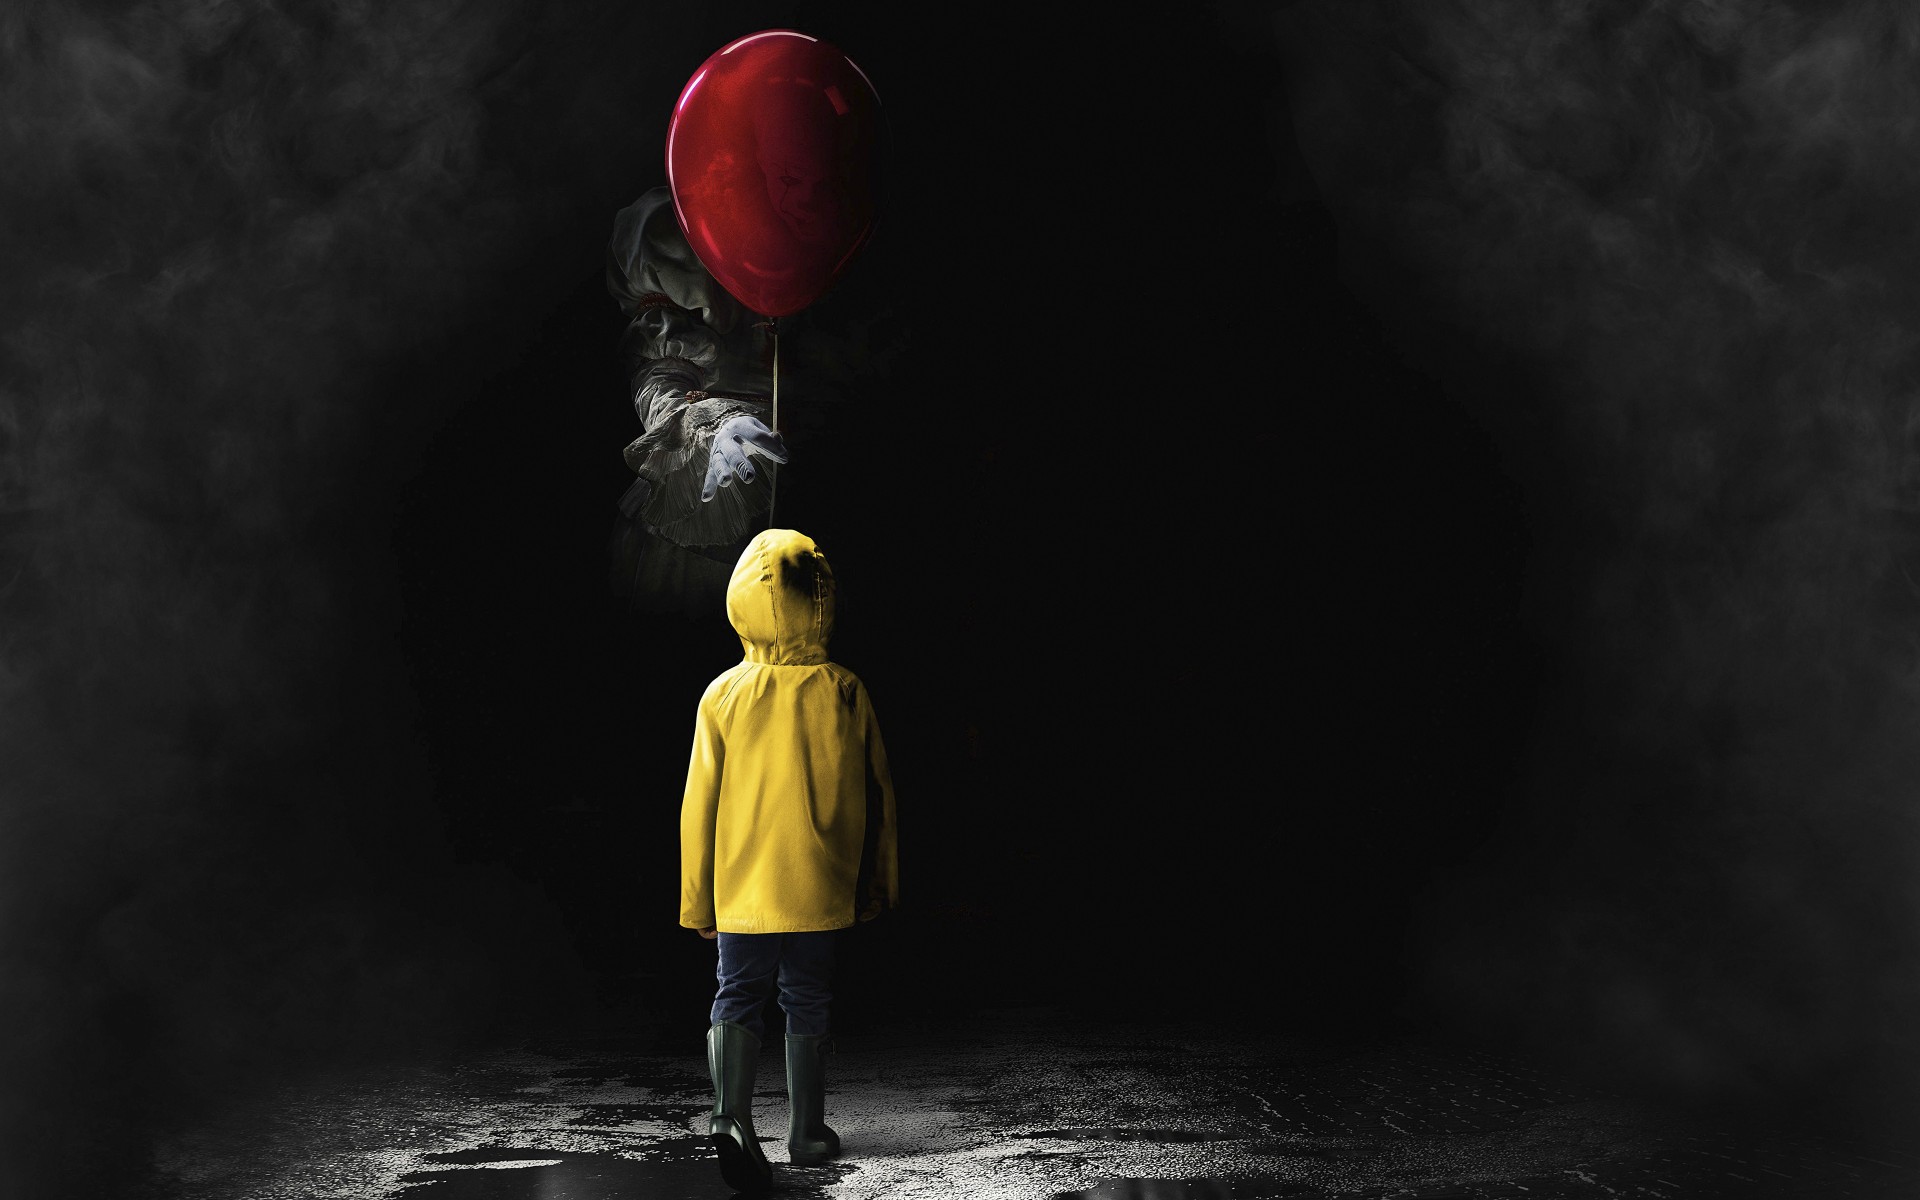 Movie Review: IT (2017)